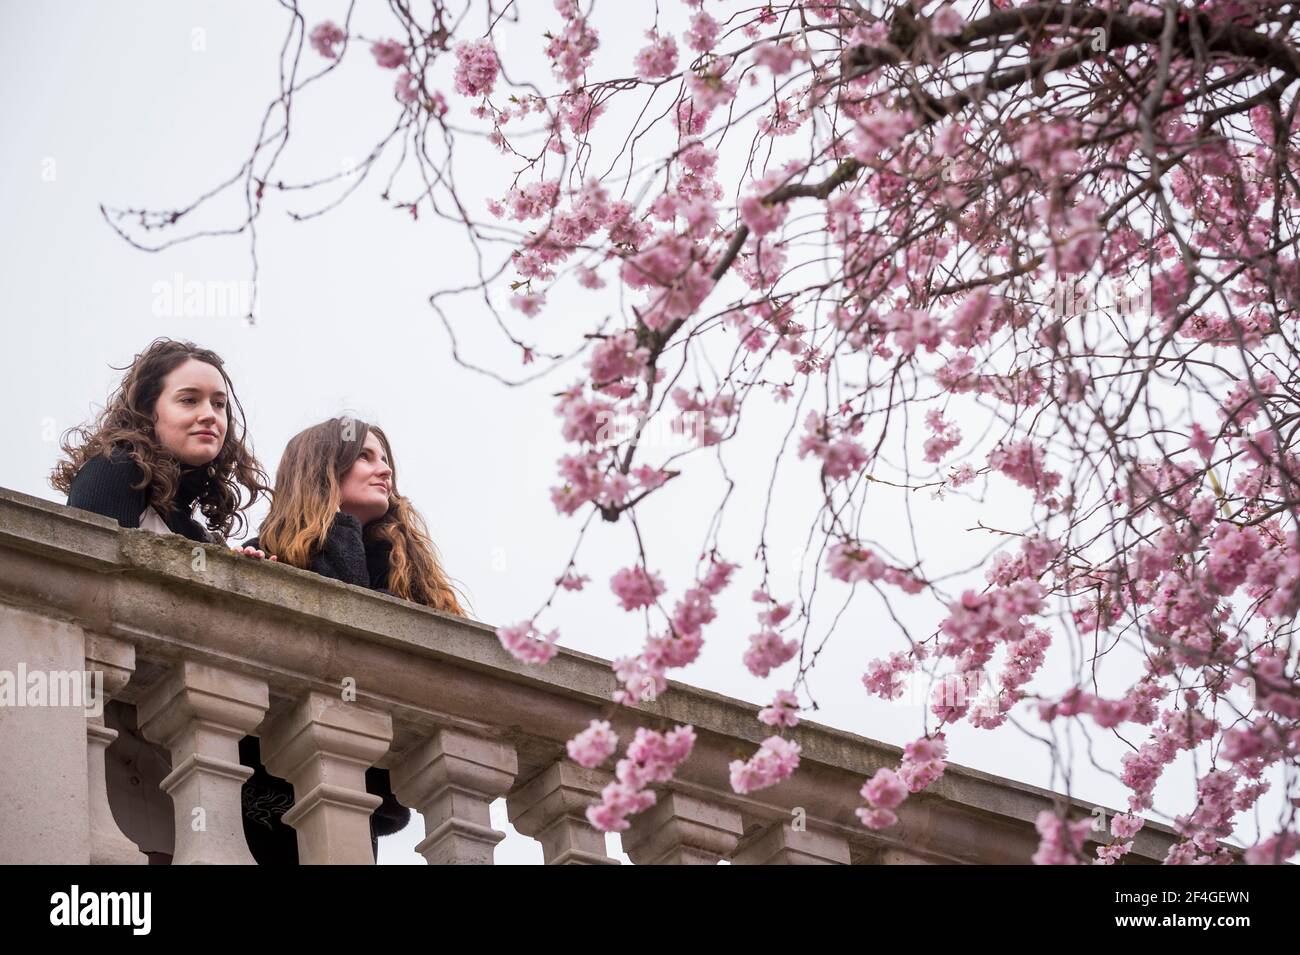 London, UK.  21 March 2021. UK Weather – Women admire the blossom flowering in St James’s Park on the first weekend of Spring following the vernal equinox. From now on, the northern hemisphere will experience longer days and warmer temperatures.  Credit: Stephen Chung / Alamy Live News Stock Photo